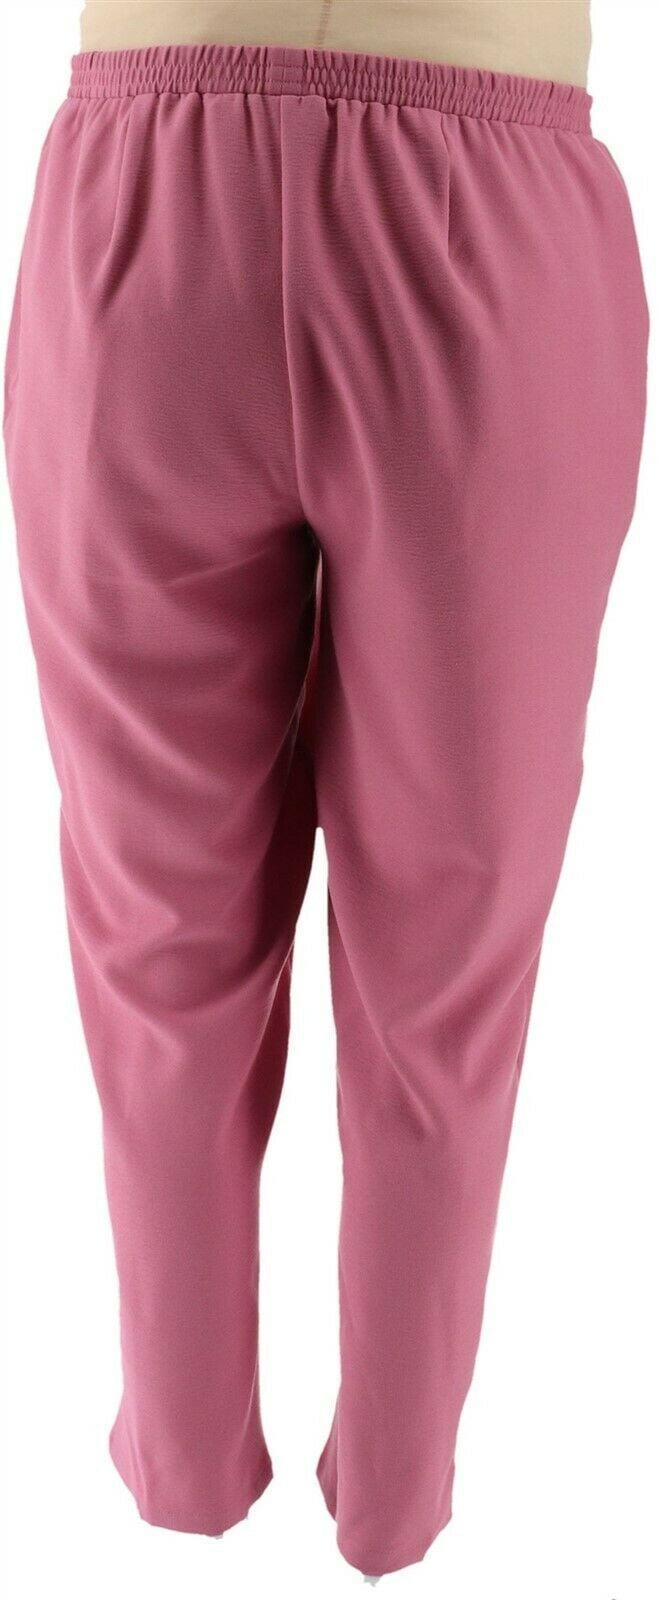 Bob Mackie Woven Crepe Pull-On Pants Rose M NEW A303006